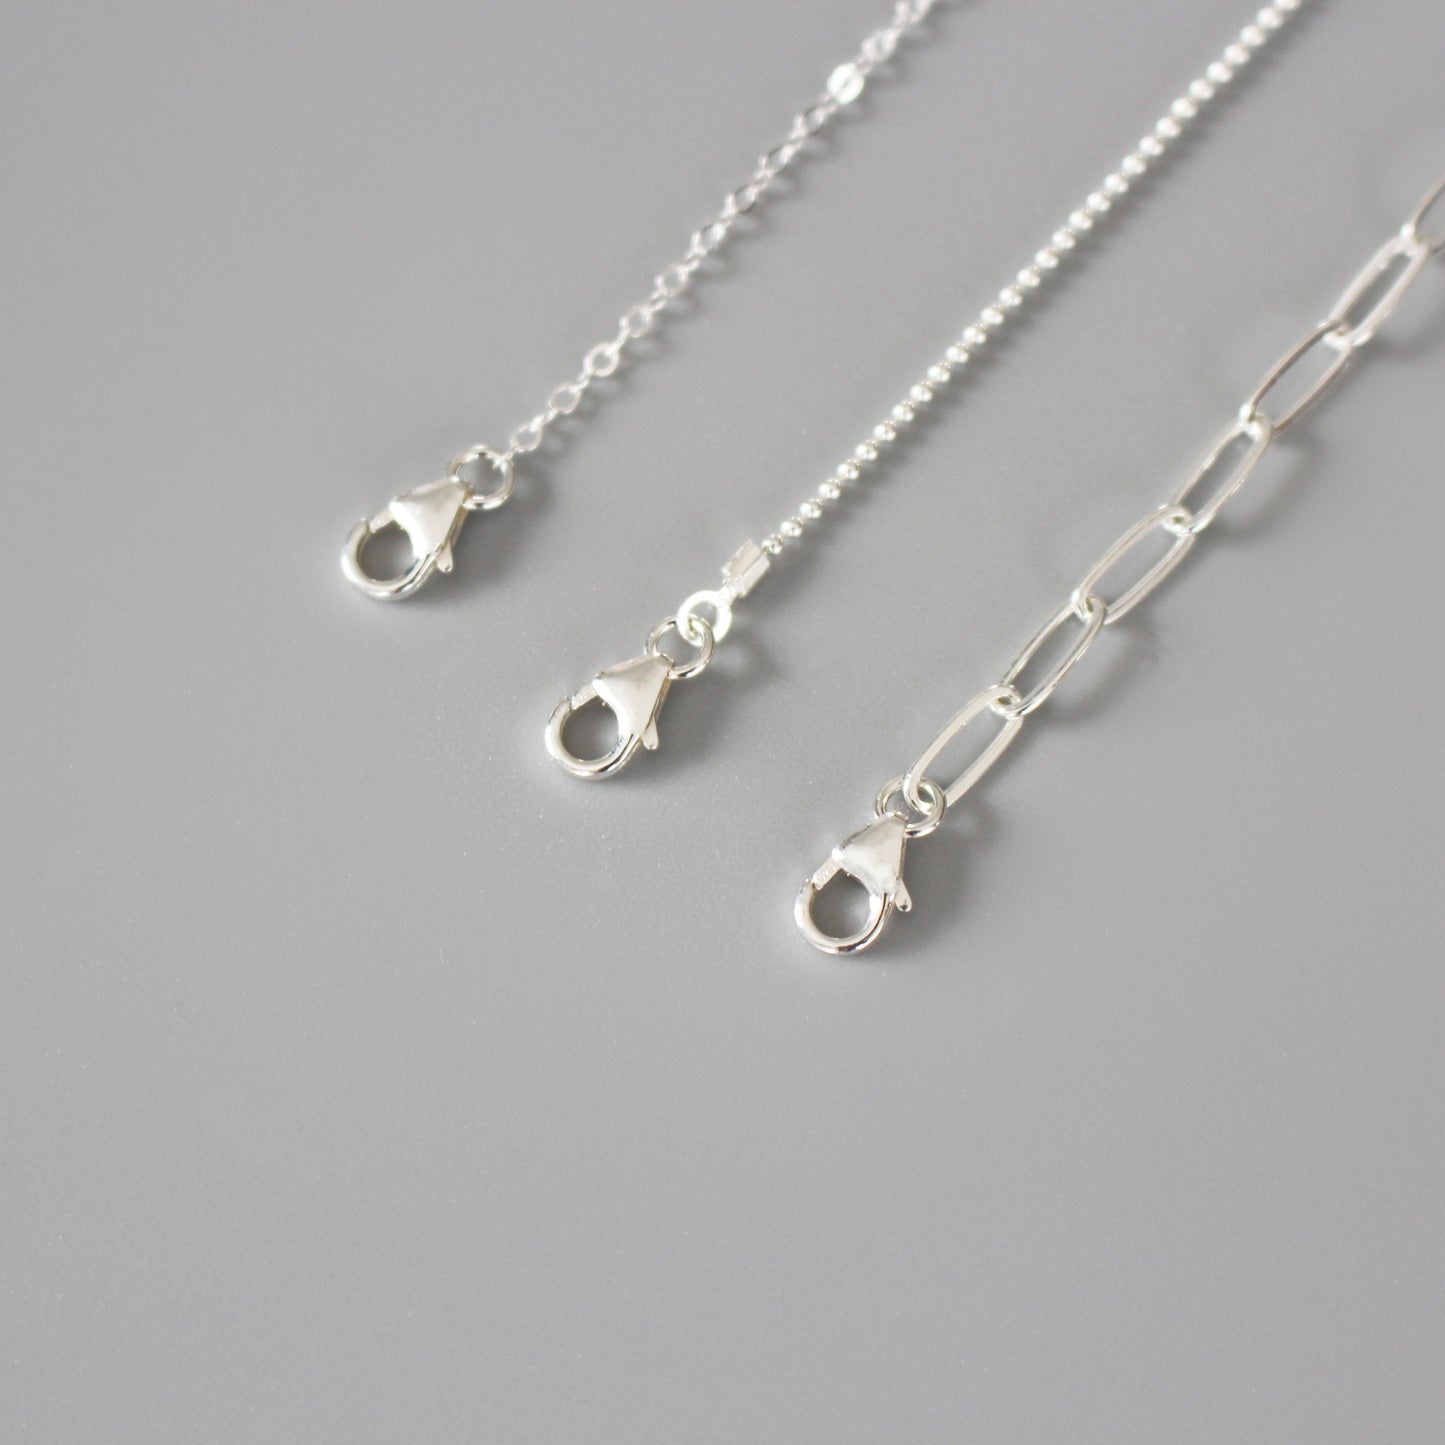 925 sterling silver necklace 9 styles | Dainty minimalist chain | Choker necklace